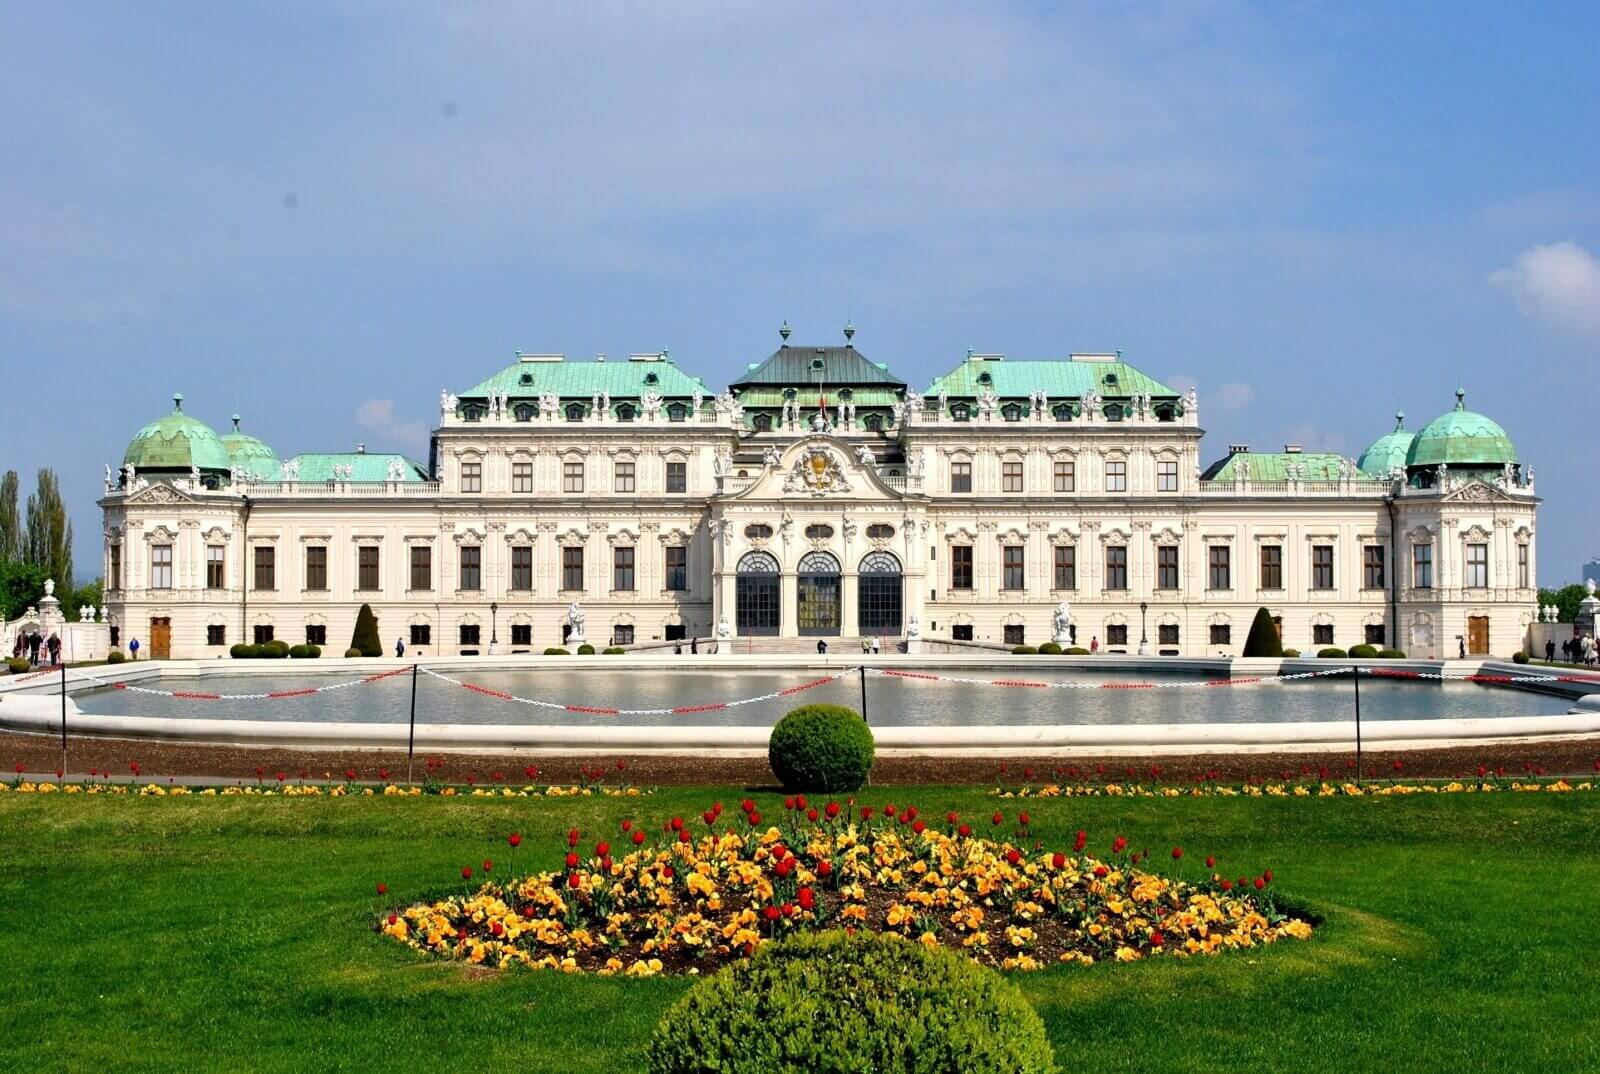 Vienna Belvedere Palaces And Belvedere Museums: Ultimate Visitor Guide